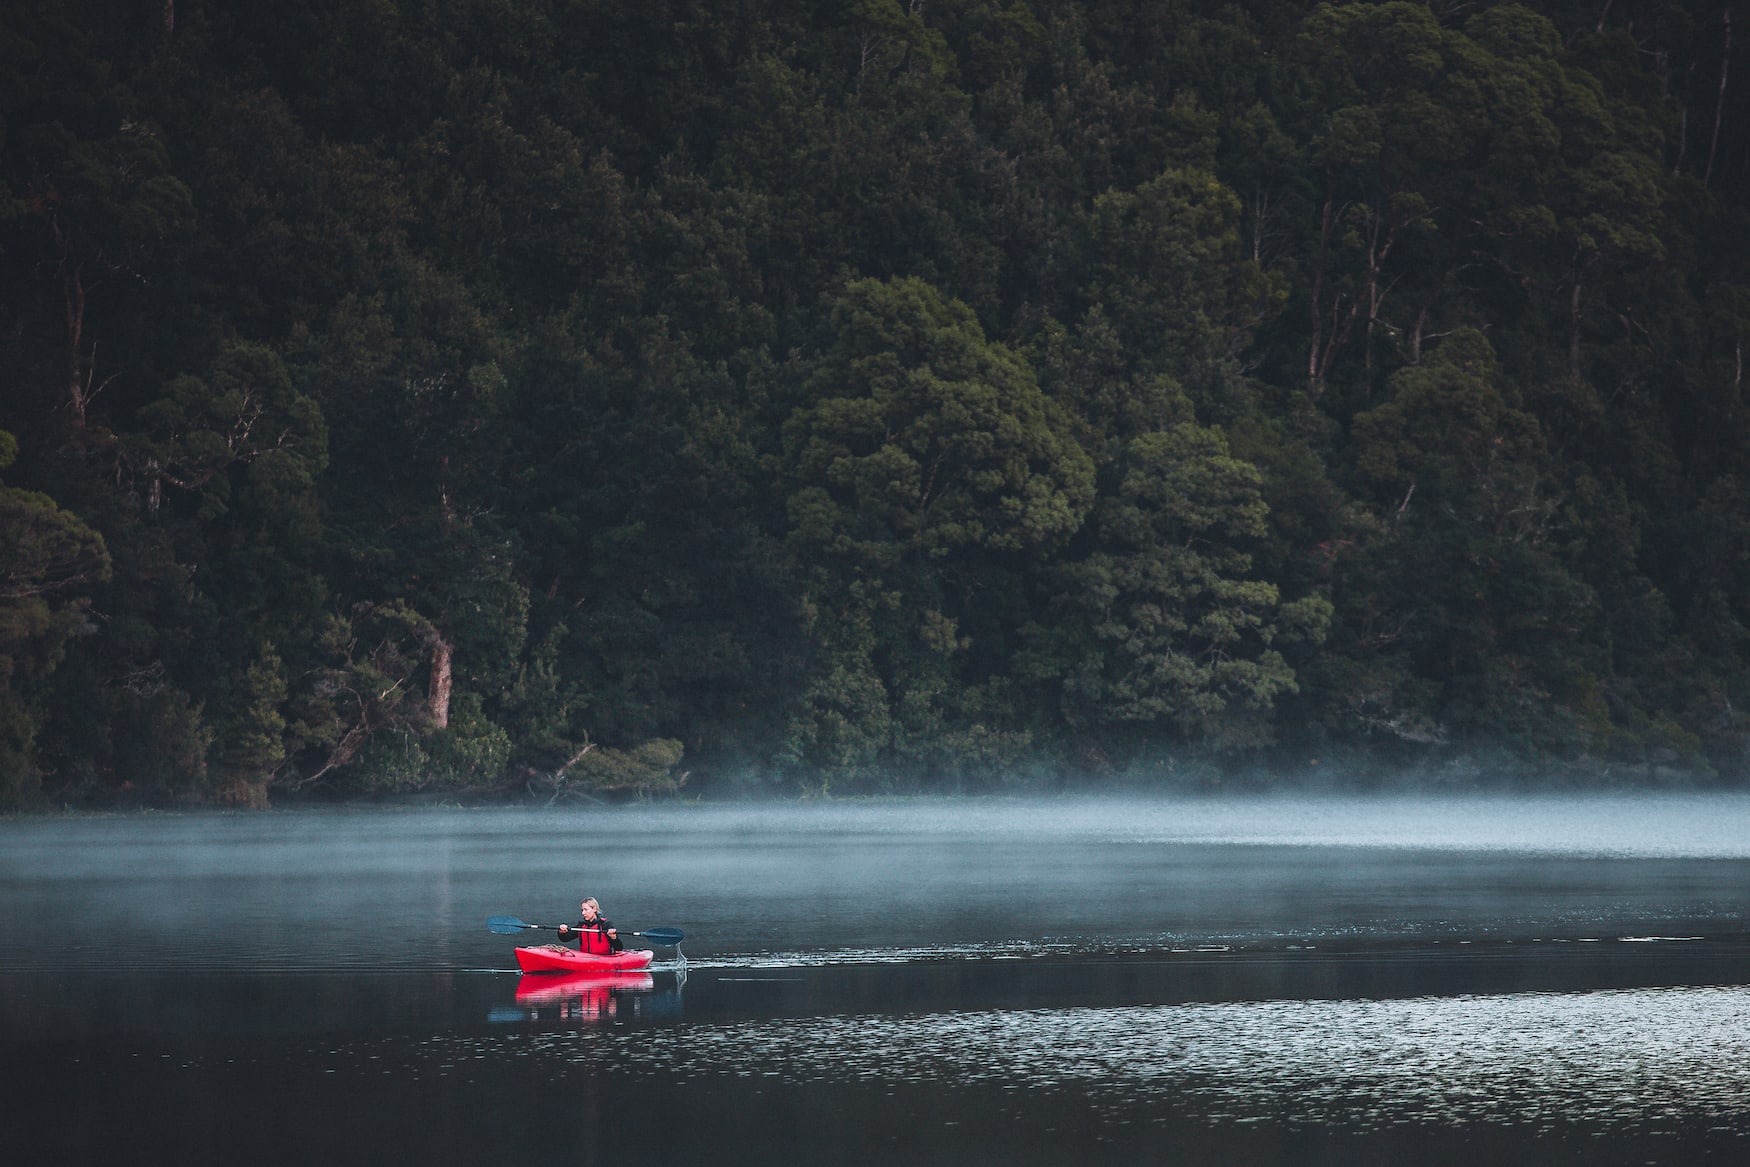 Kayaking on the Beman River is a must on a trip to Tasmania